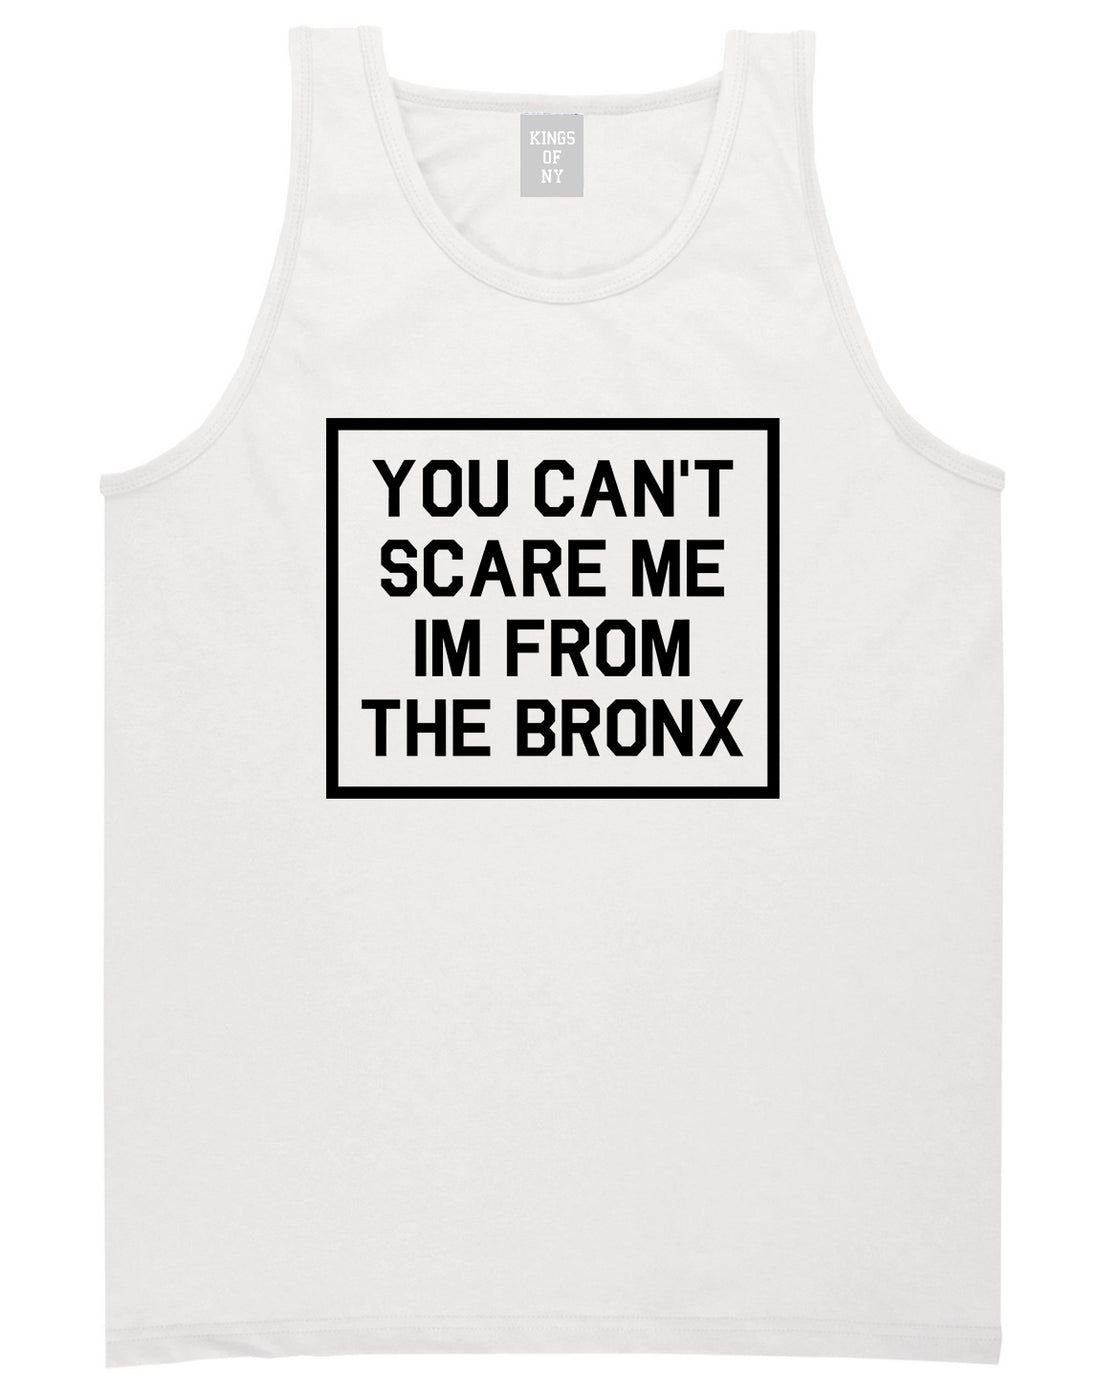 You Cant Scare Me Im From The Bronx Mens Tank Top T-Shirt White